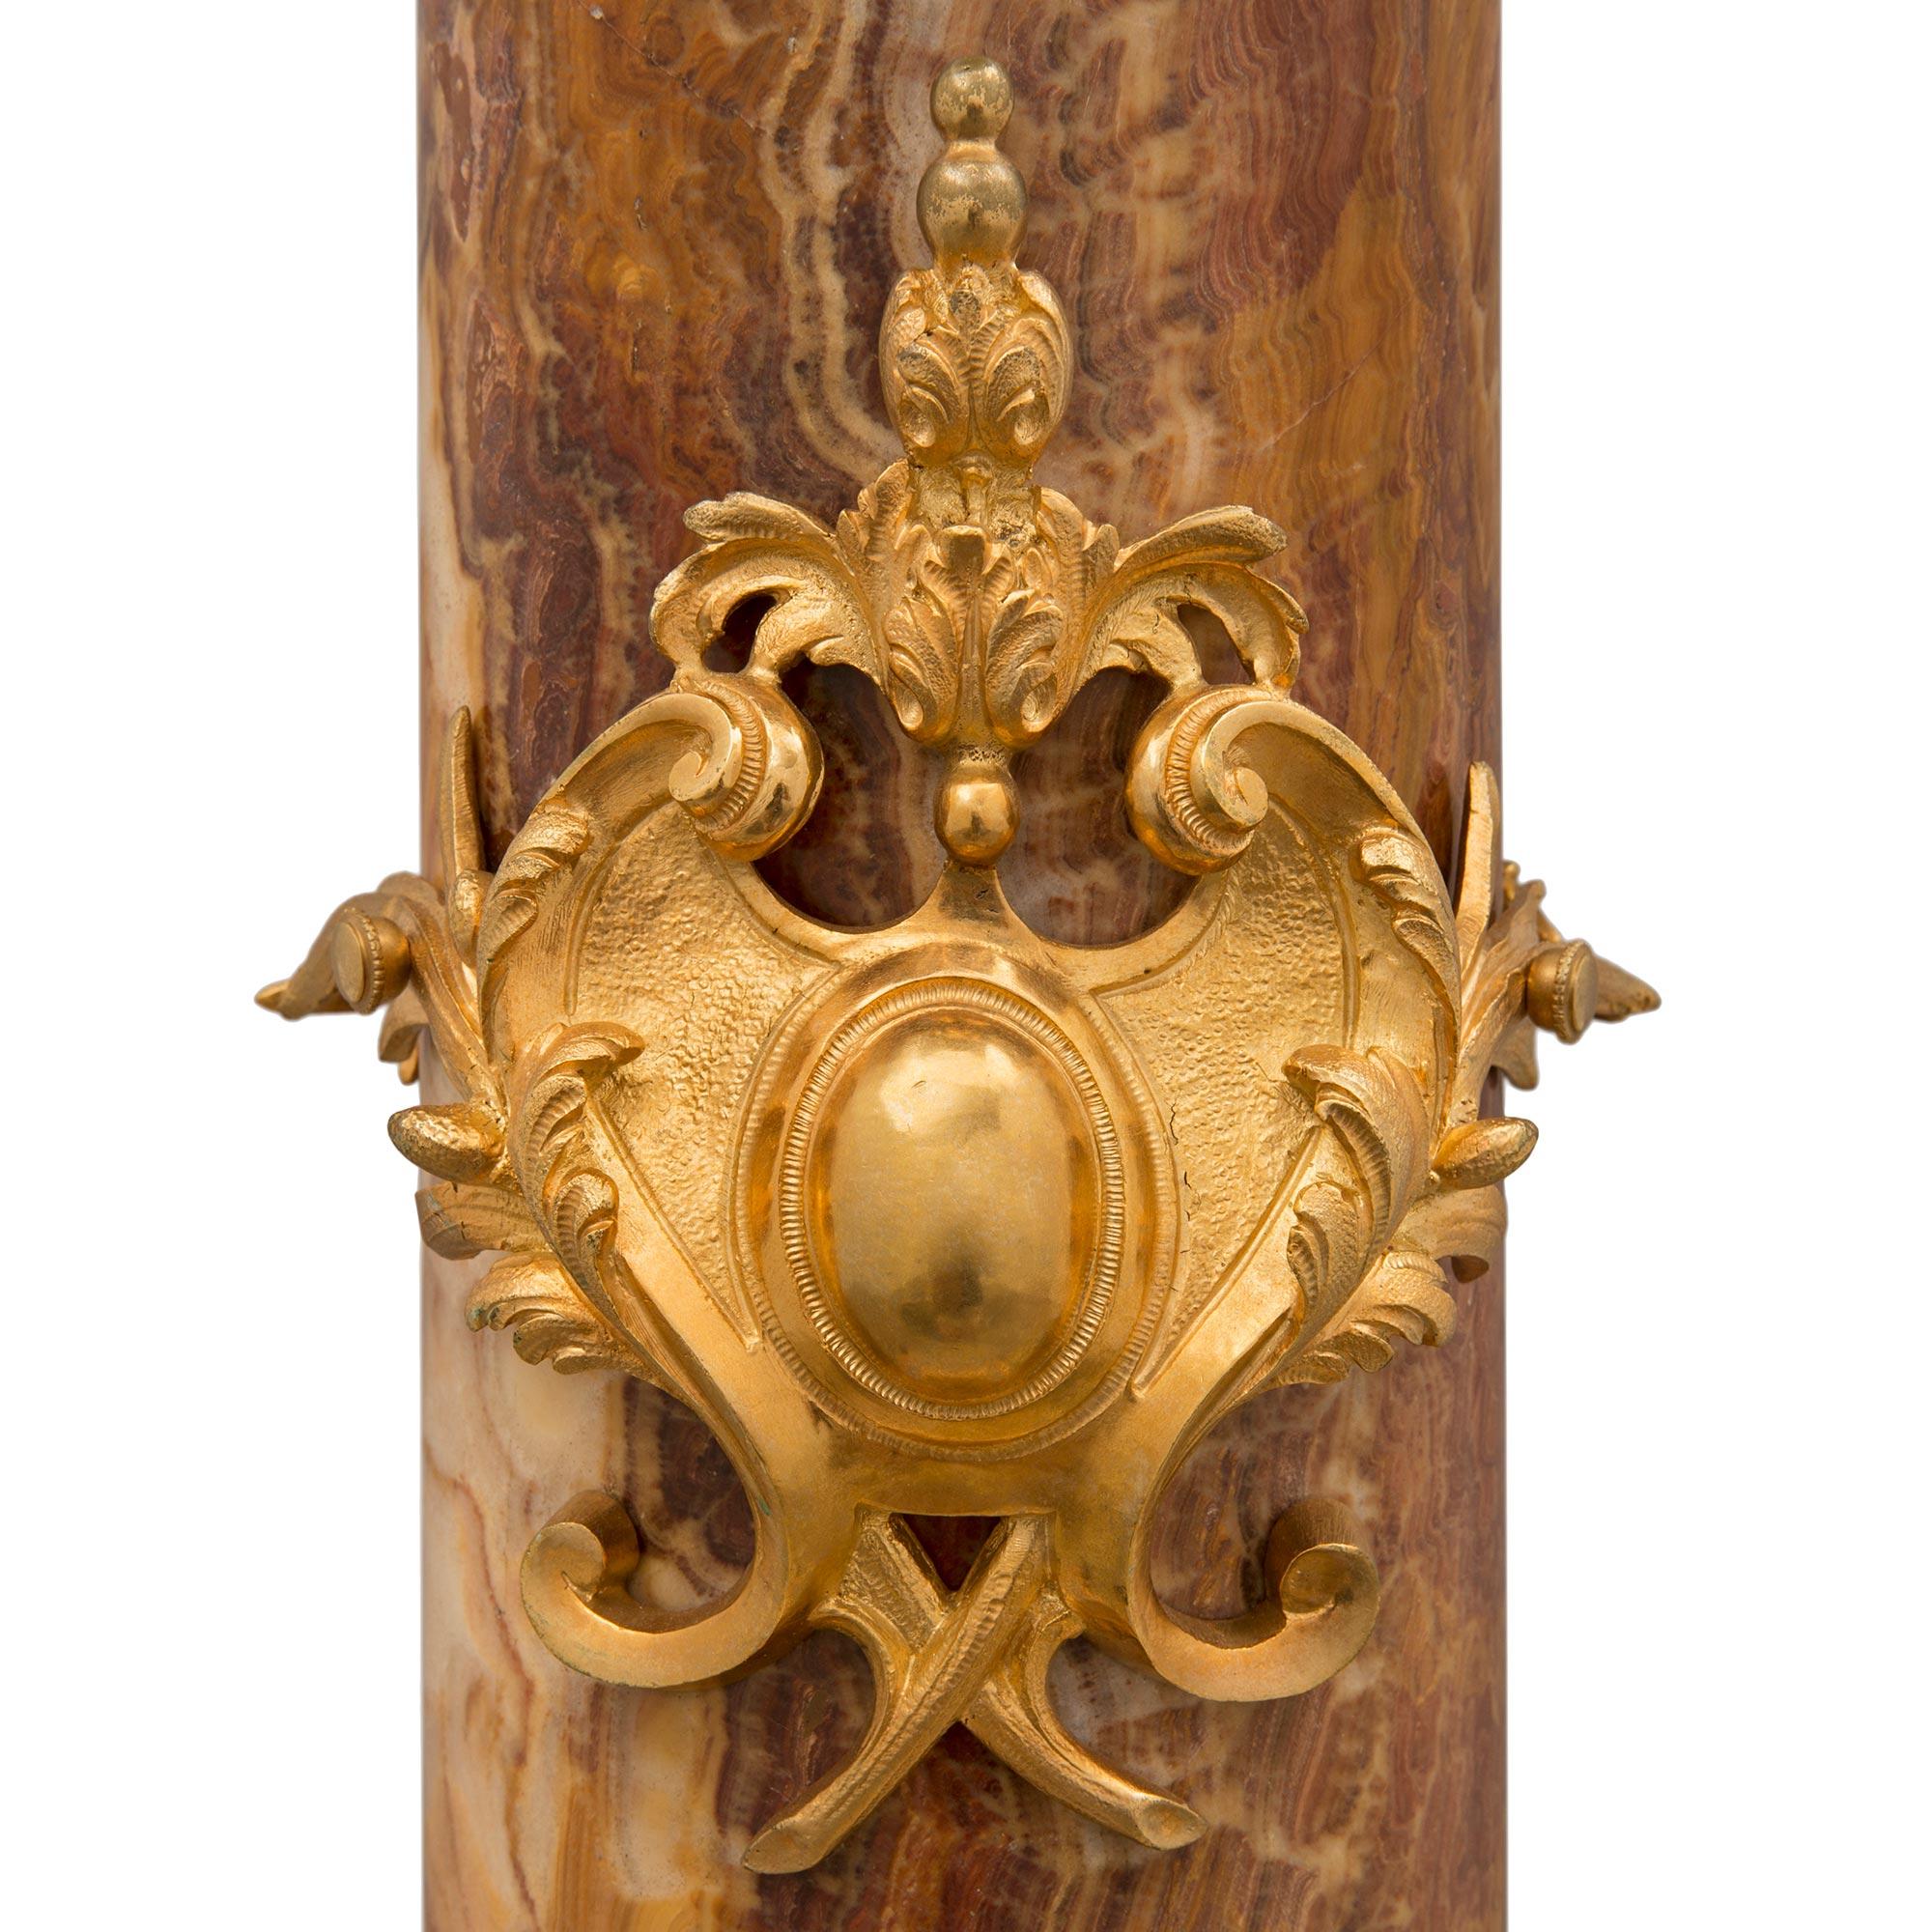 Pair of French 19th Century Belle Époque Period Onyx & Ormolu Mounted Pedestals For Sale 3